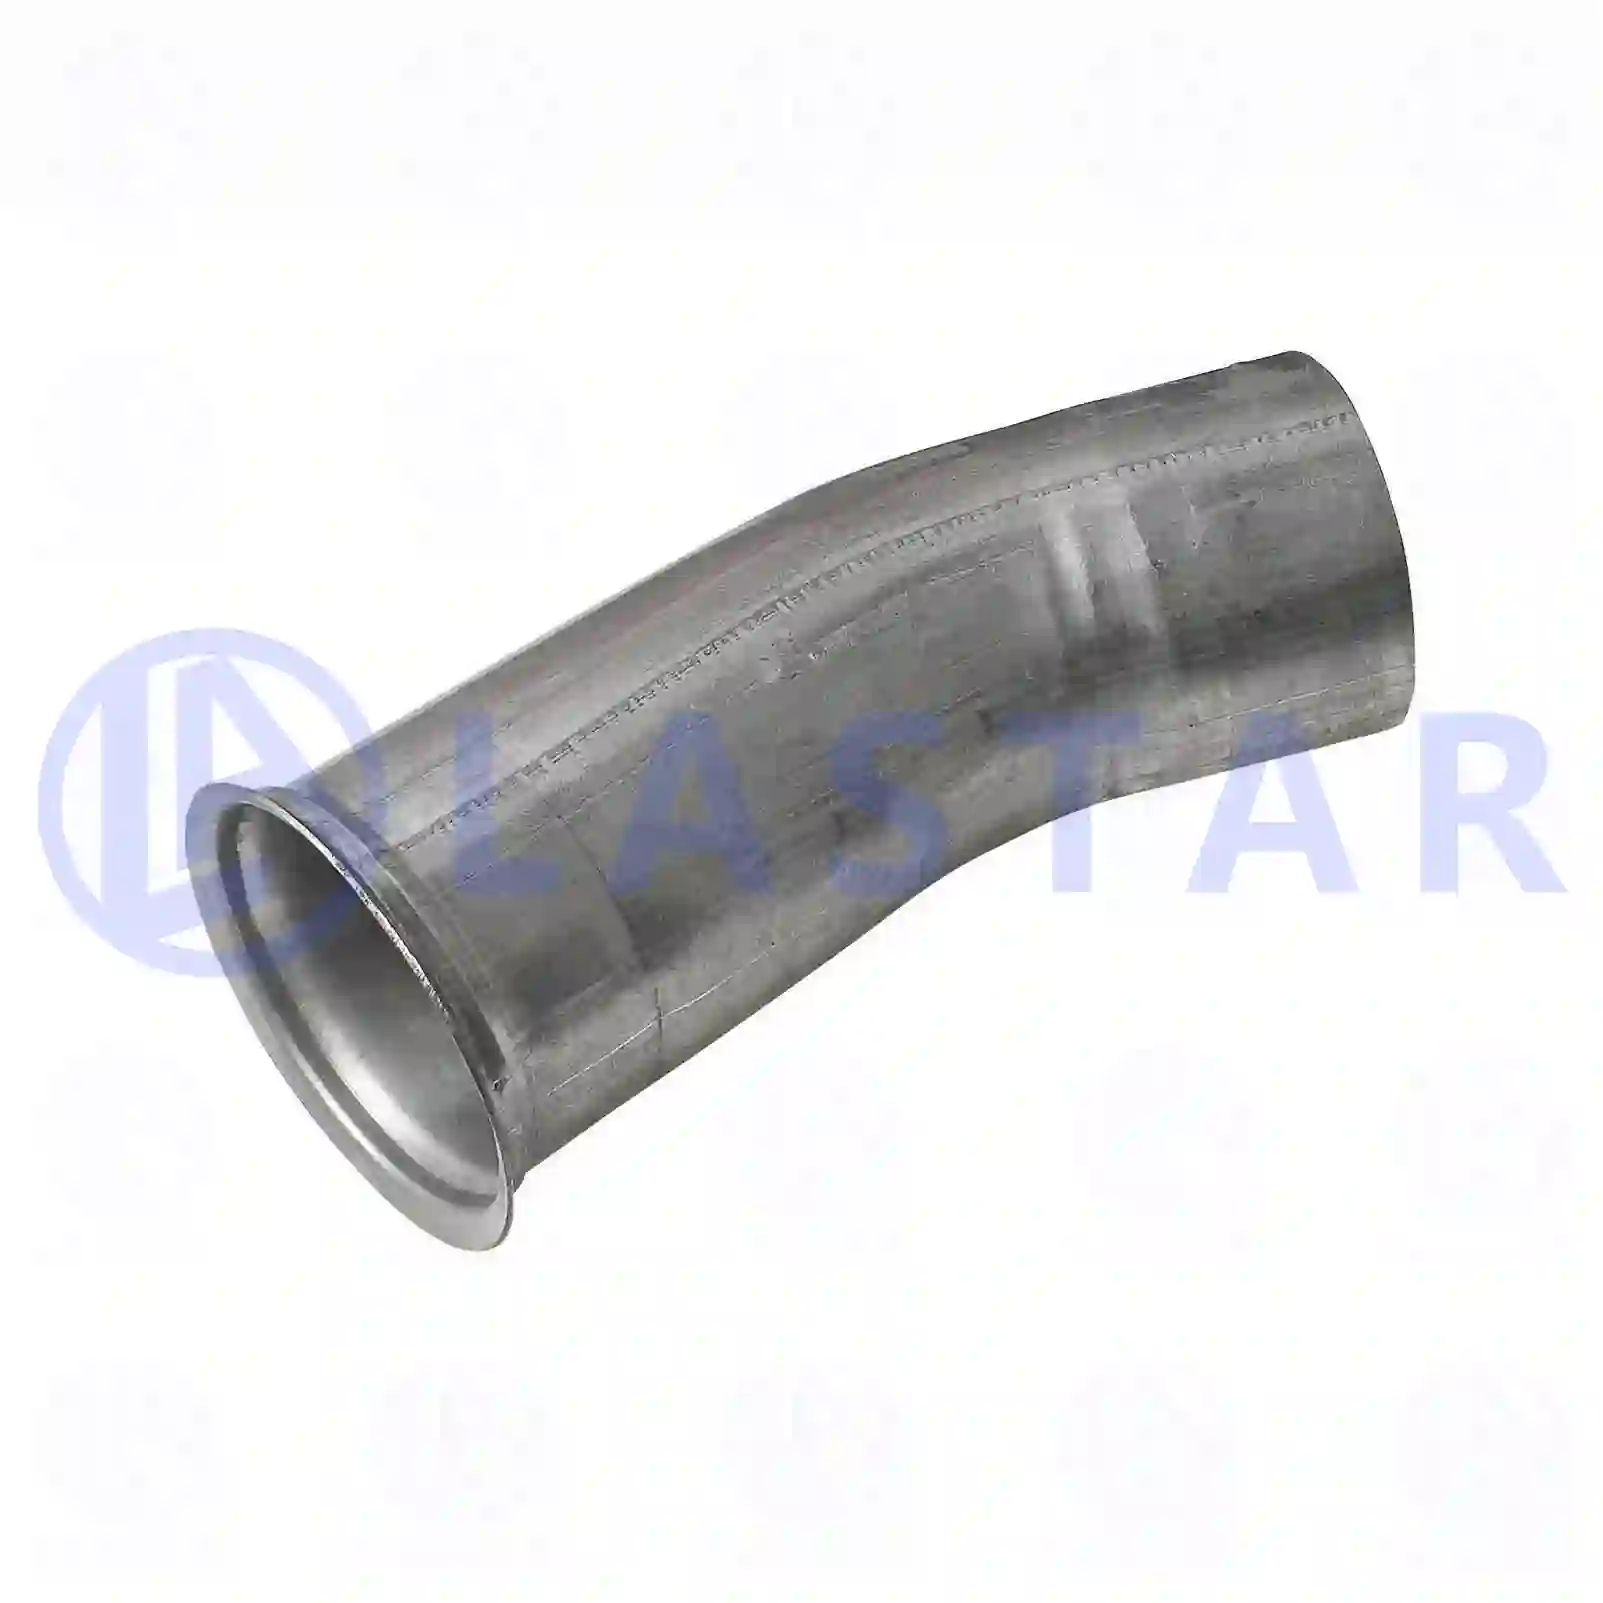 Exhaust pipe, 77706902, 7420409103, 20409 ||  77706902 Lastar Spare Part | Truck Spare Parts, Auotomotive Spare Parts Exhaust pipe, 77706902, 7420409103, 20409 ||  77706902 Lastar Spare Part | Truck Spare Parts, Auotomotive Spare Parts